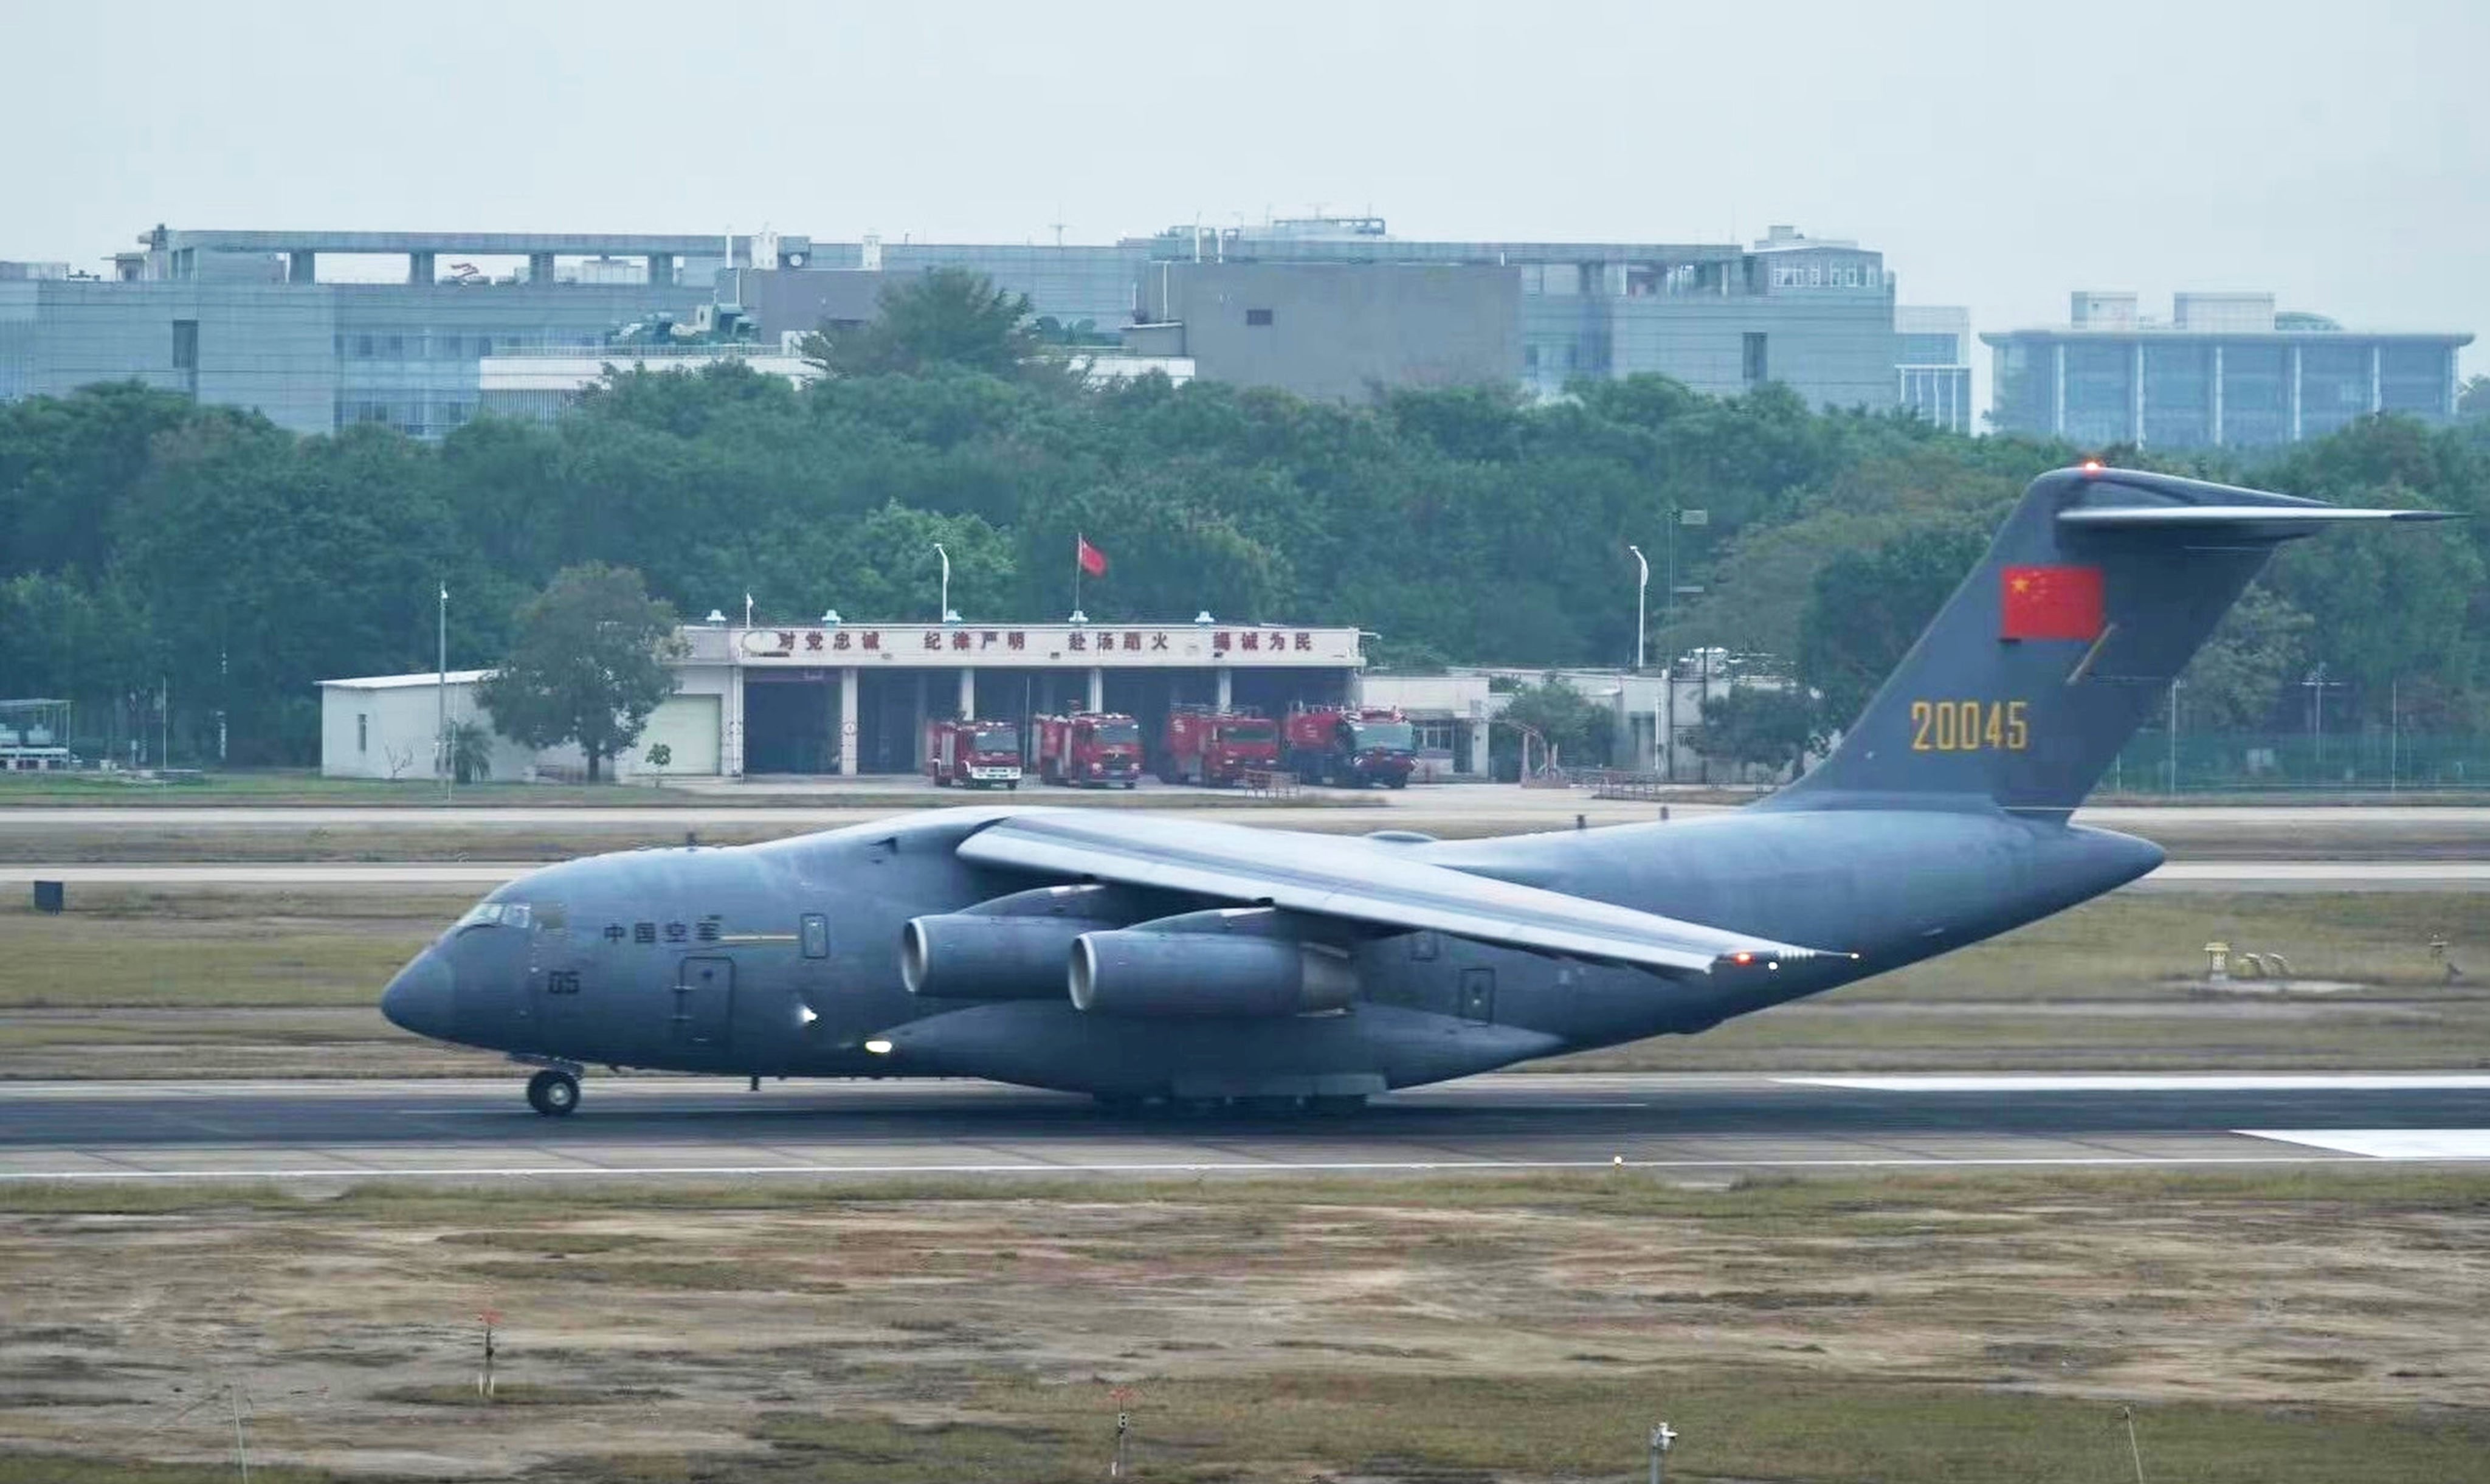 A Y-20 military transport plane carrying supplies takes off from Guangzhou Baiyun International Airport. Photo: Weibo